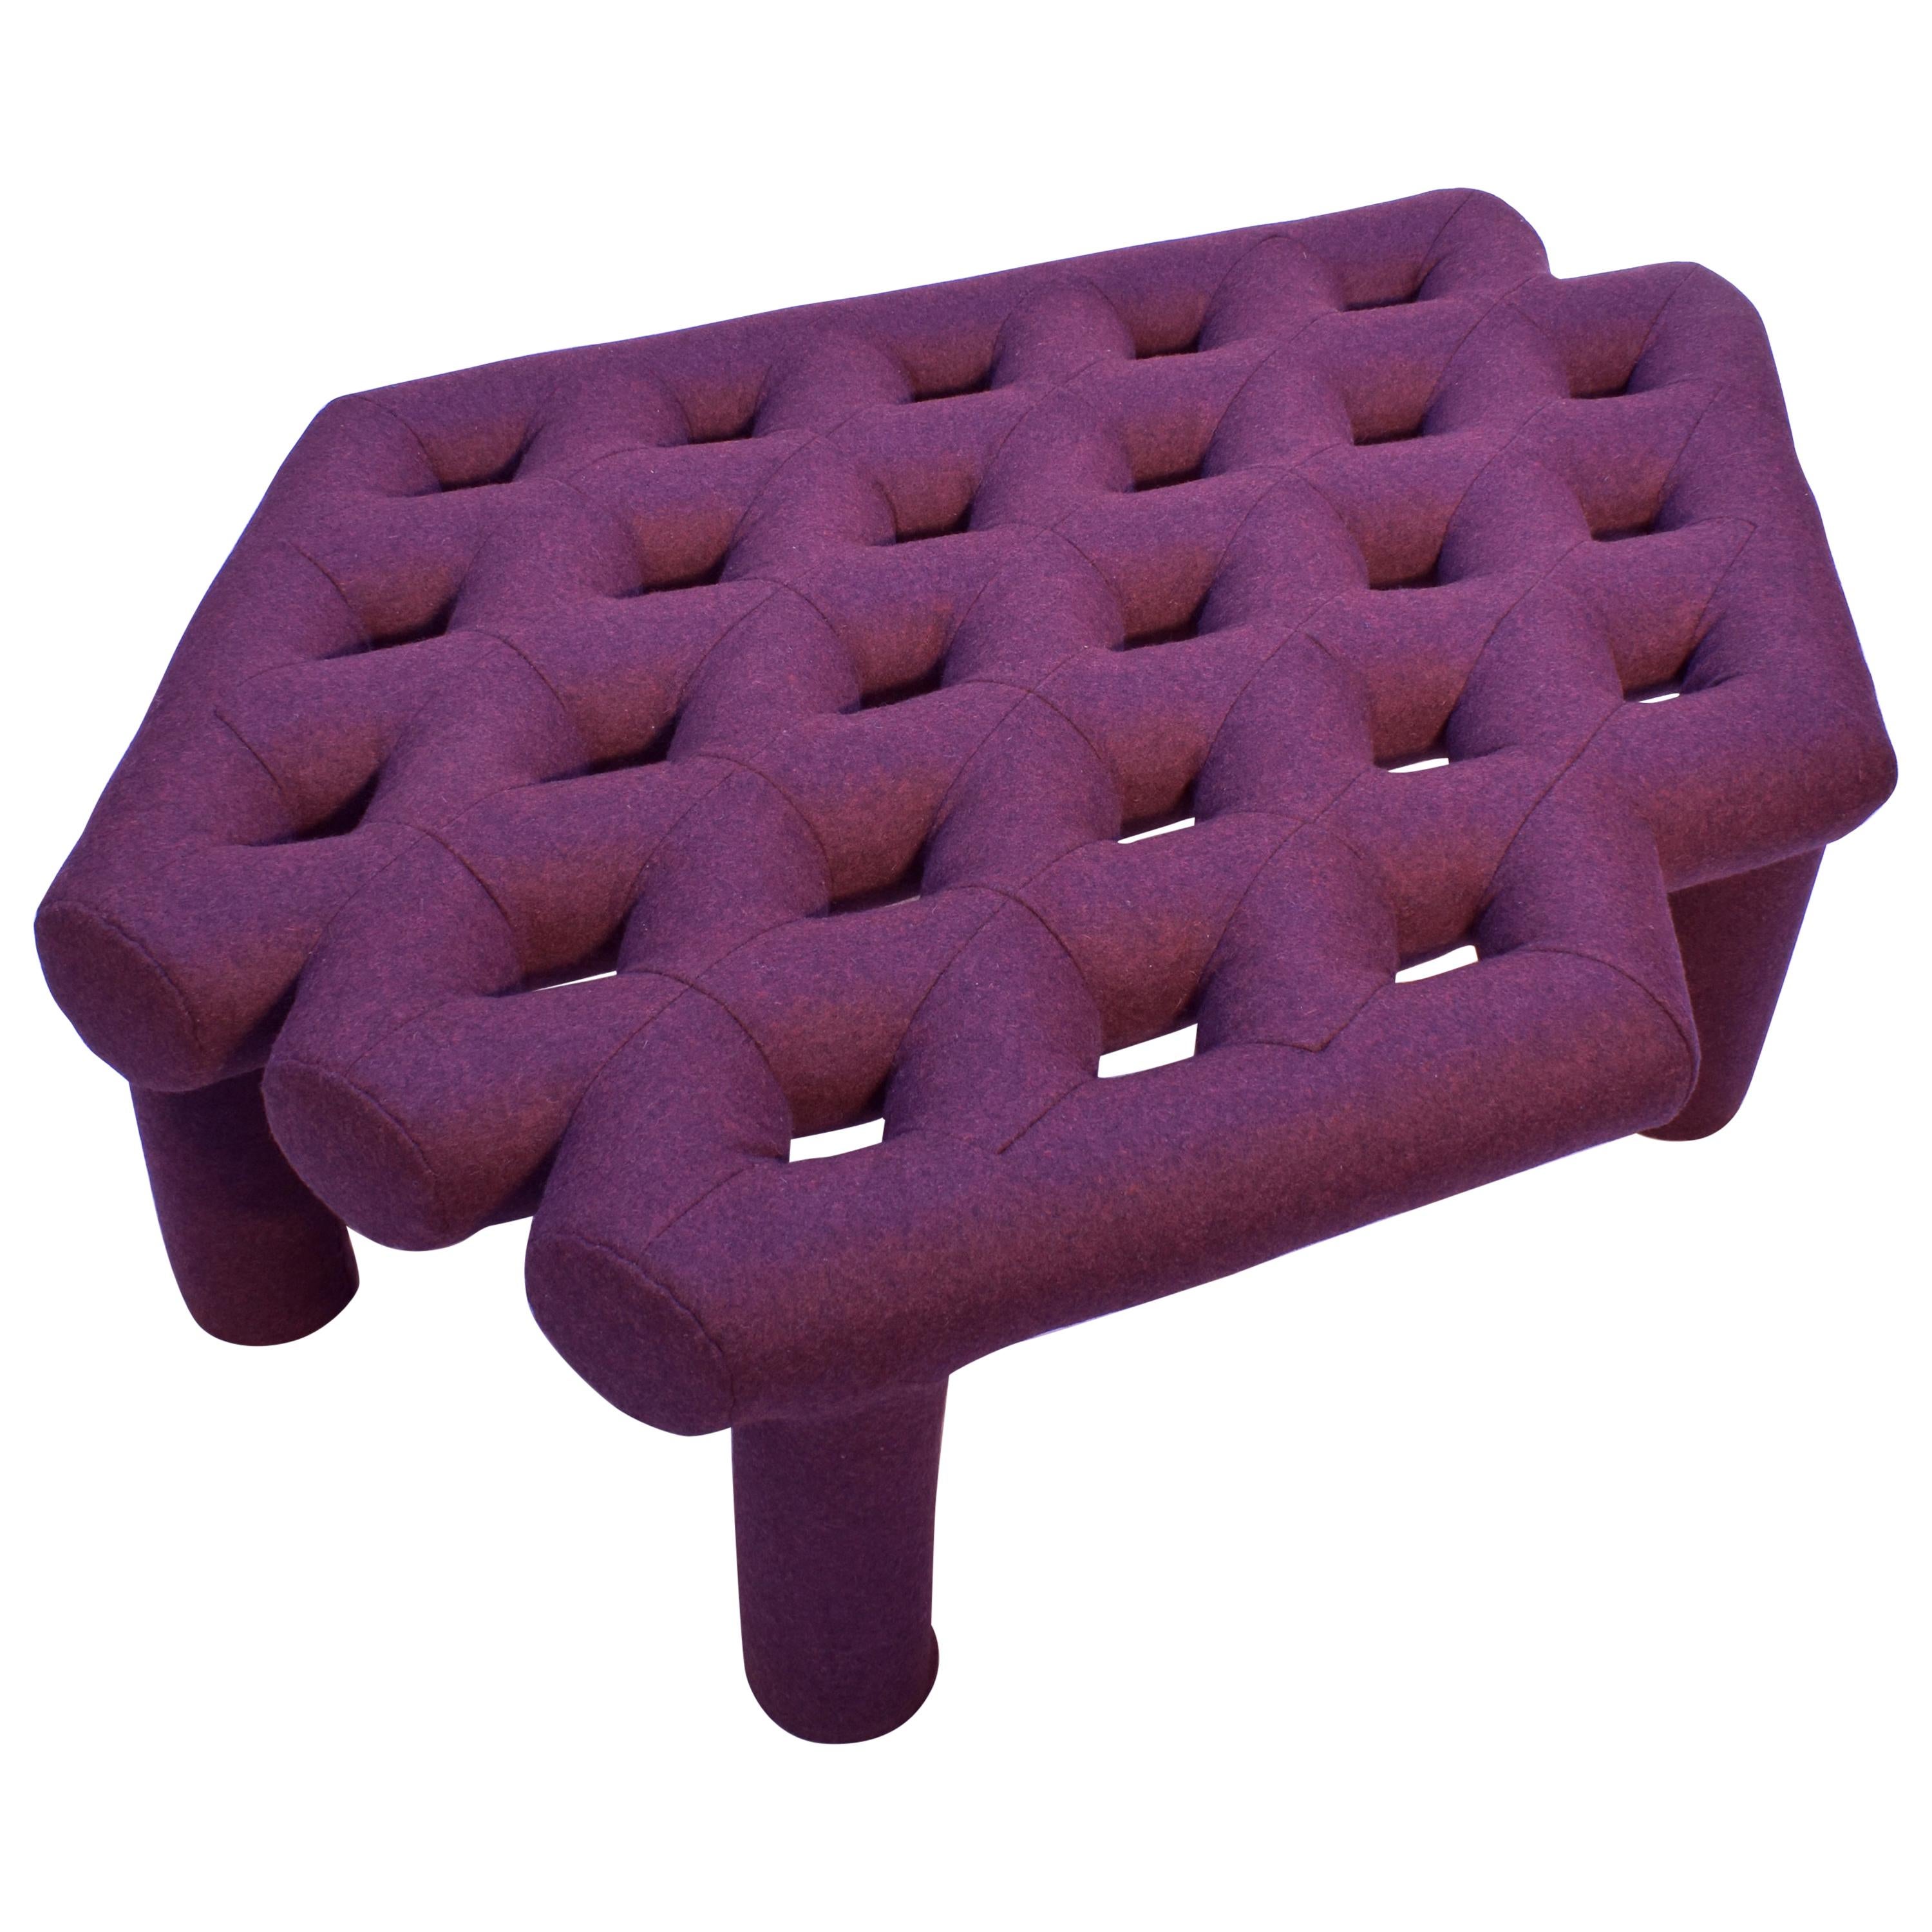 Soft Diamond Seat, Ottoman in Customizable Configurations and Fabric Colors